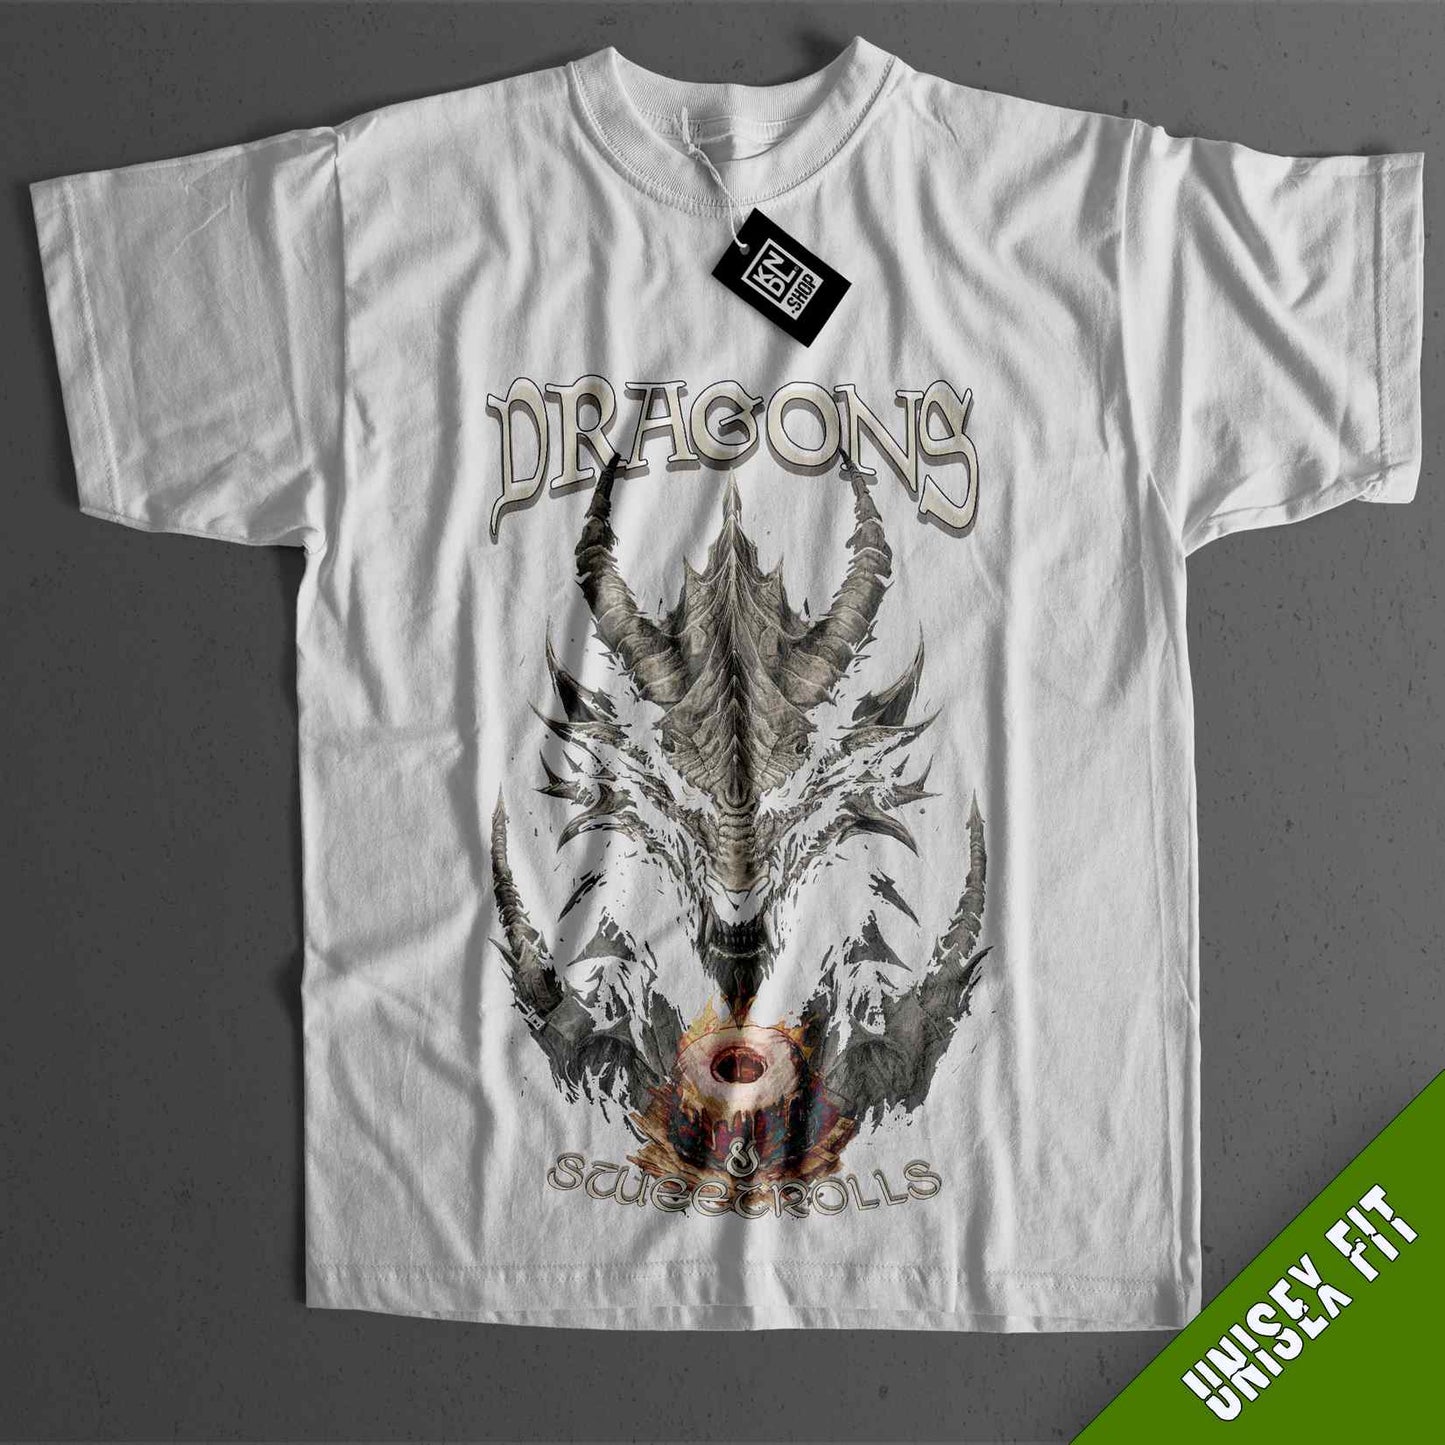 a white t - shirt with an image of a horned animal on it